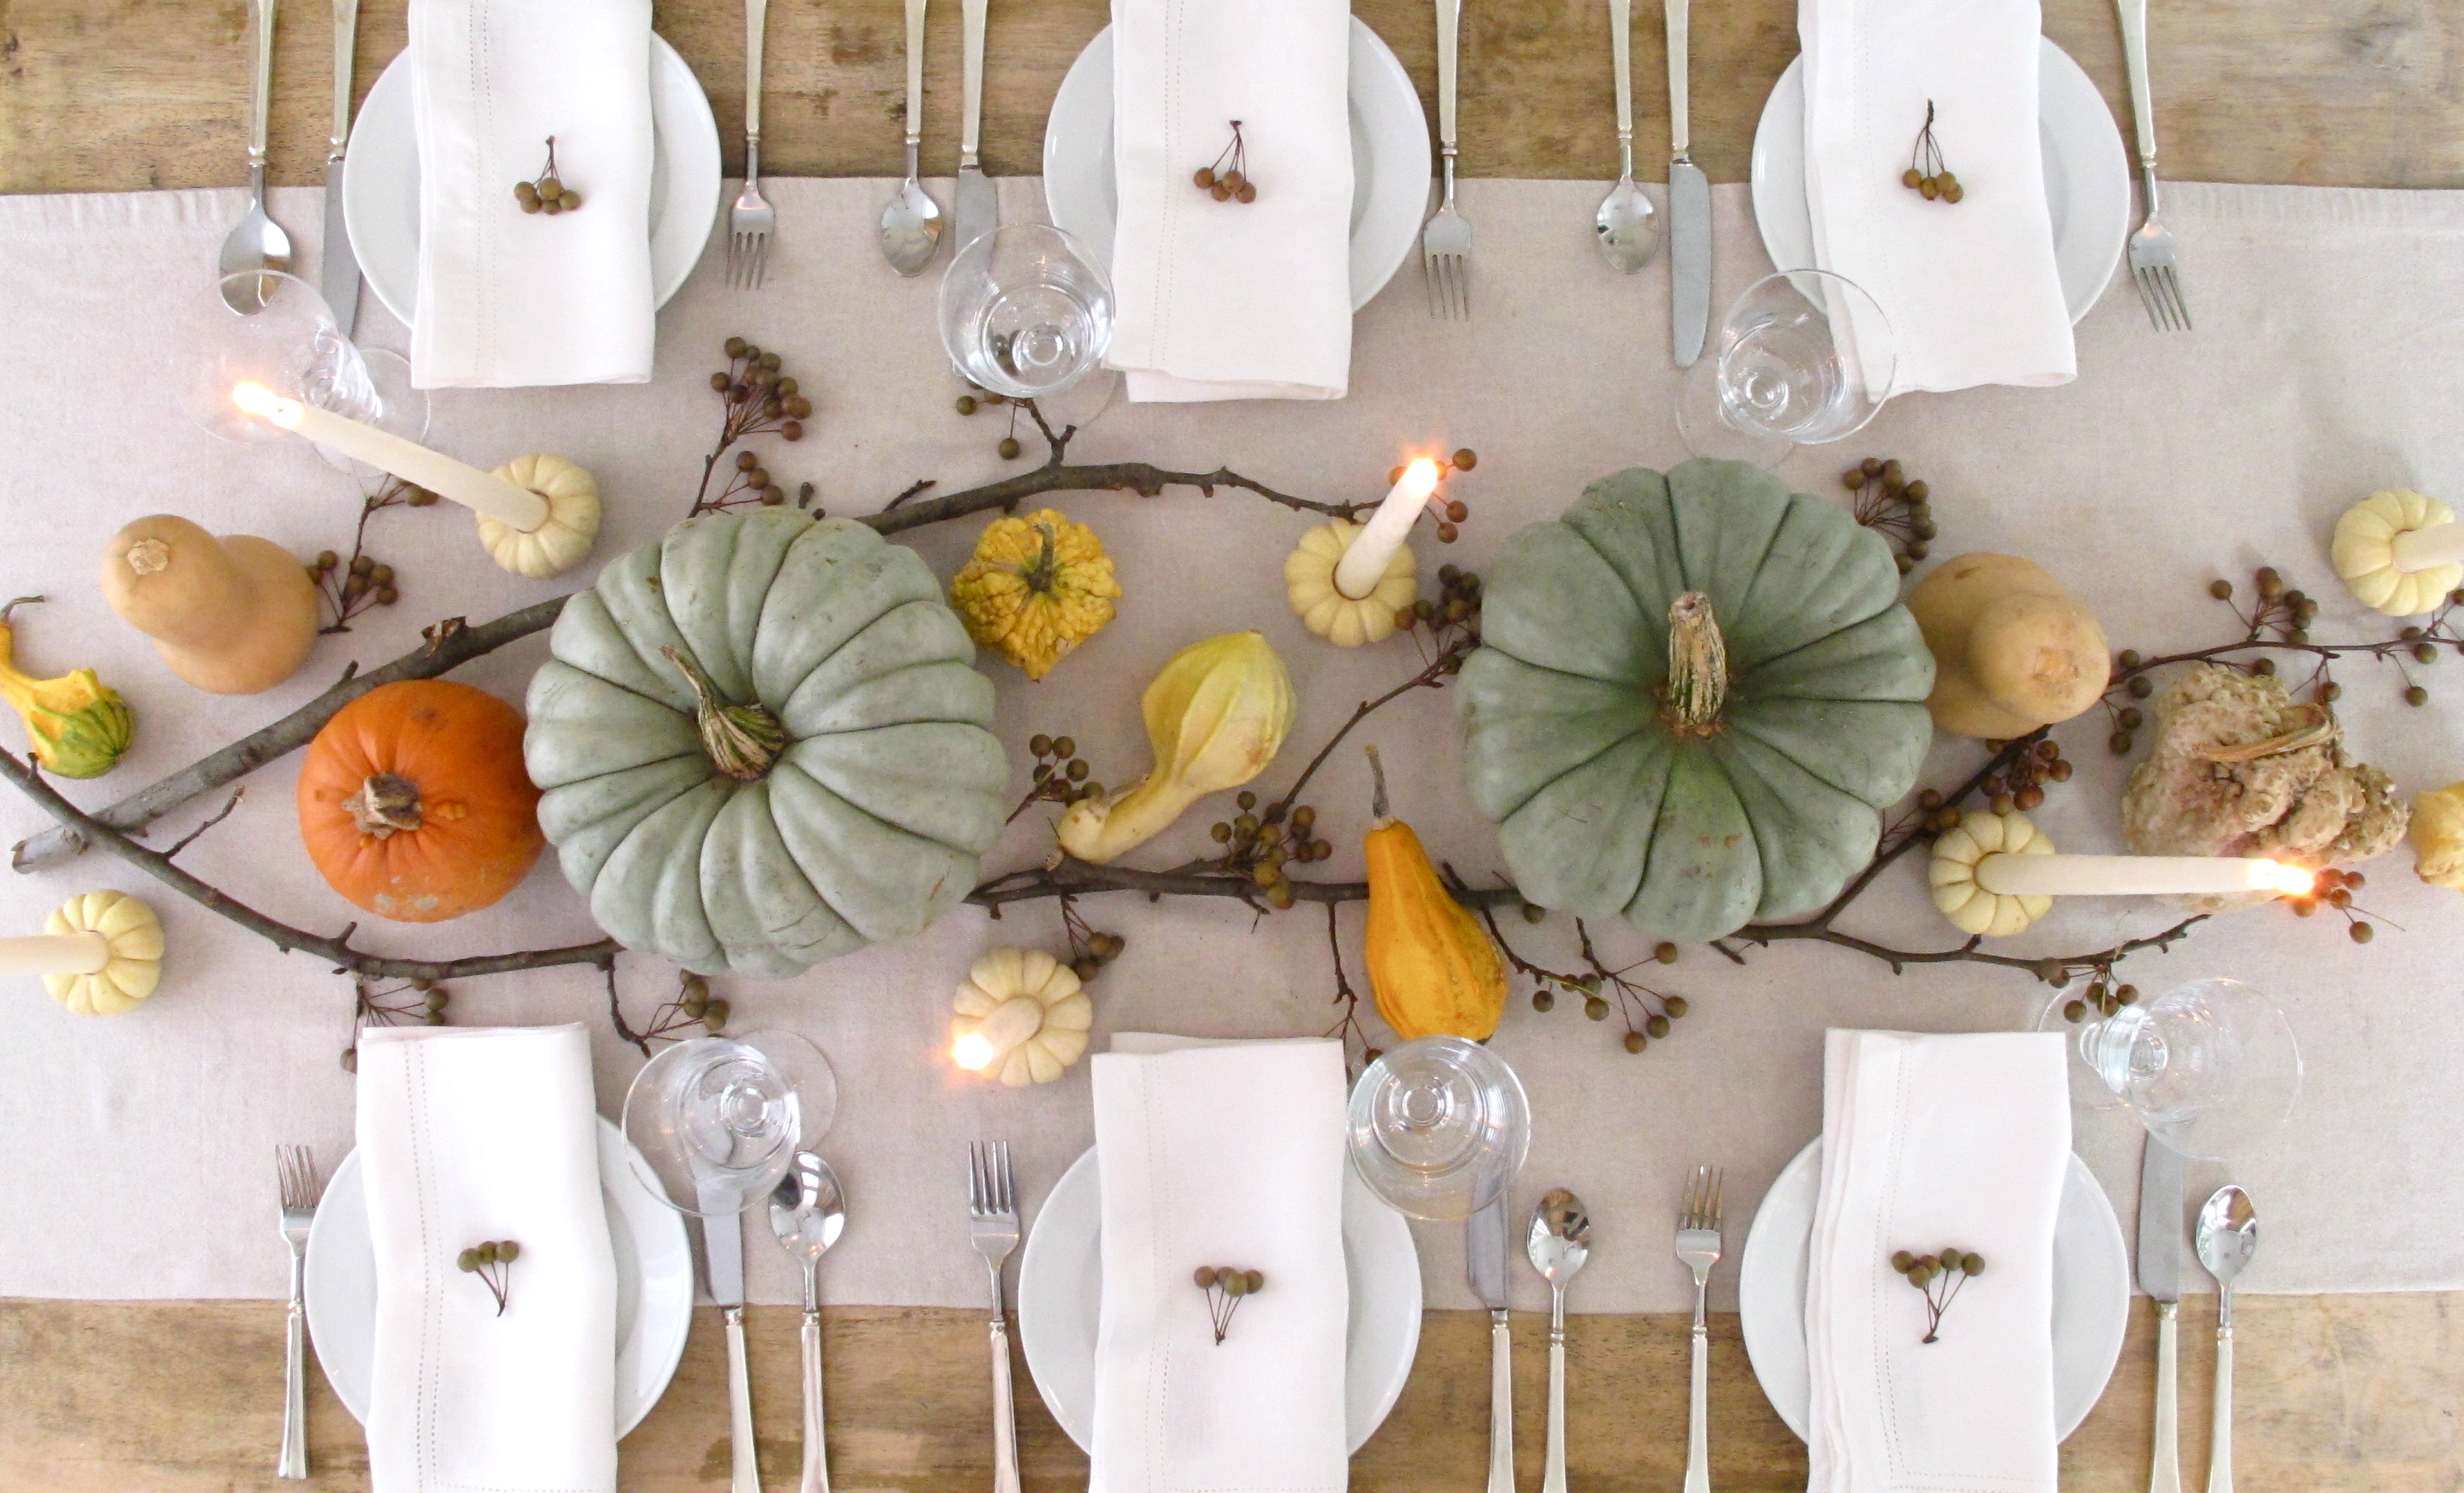 Thanksgiving Table Setting Ideas
 Our favorite Thanksgiving Day table settings TODAY